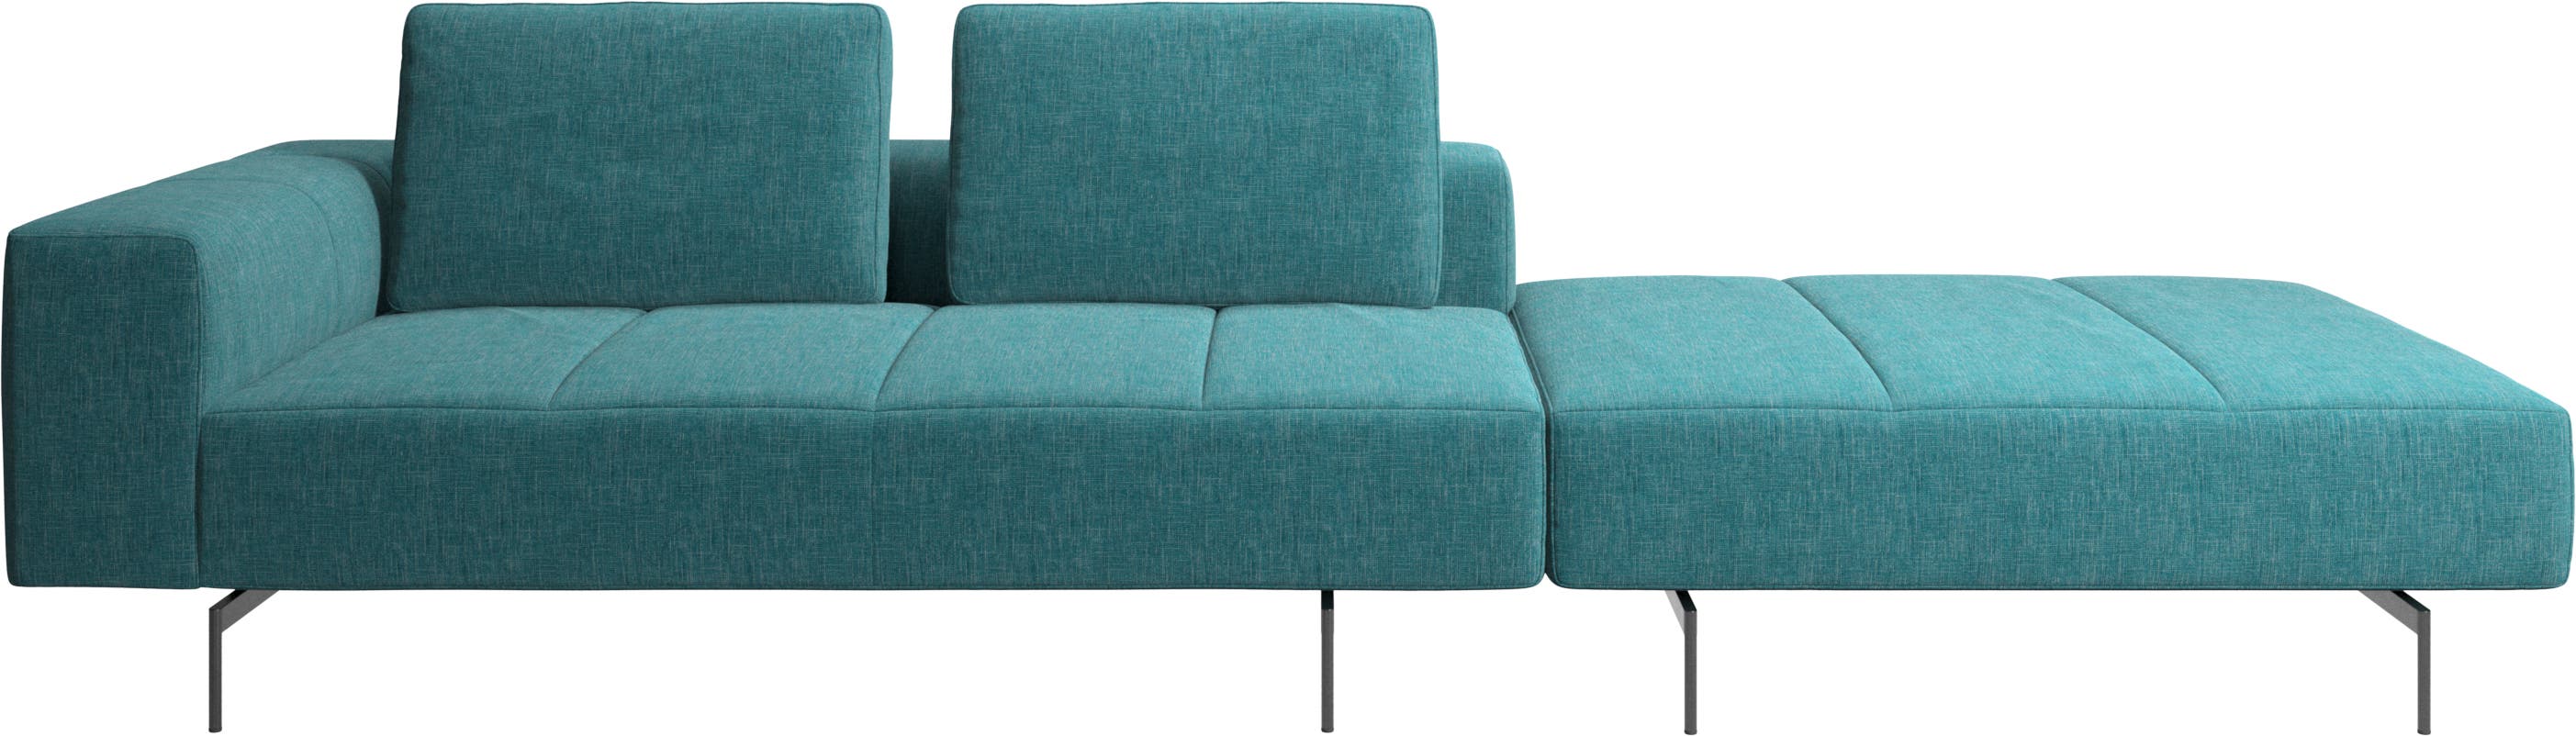 Amsterdam sofa with pouf on right side